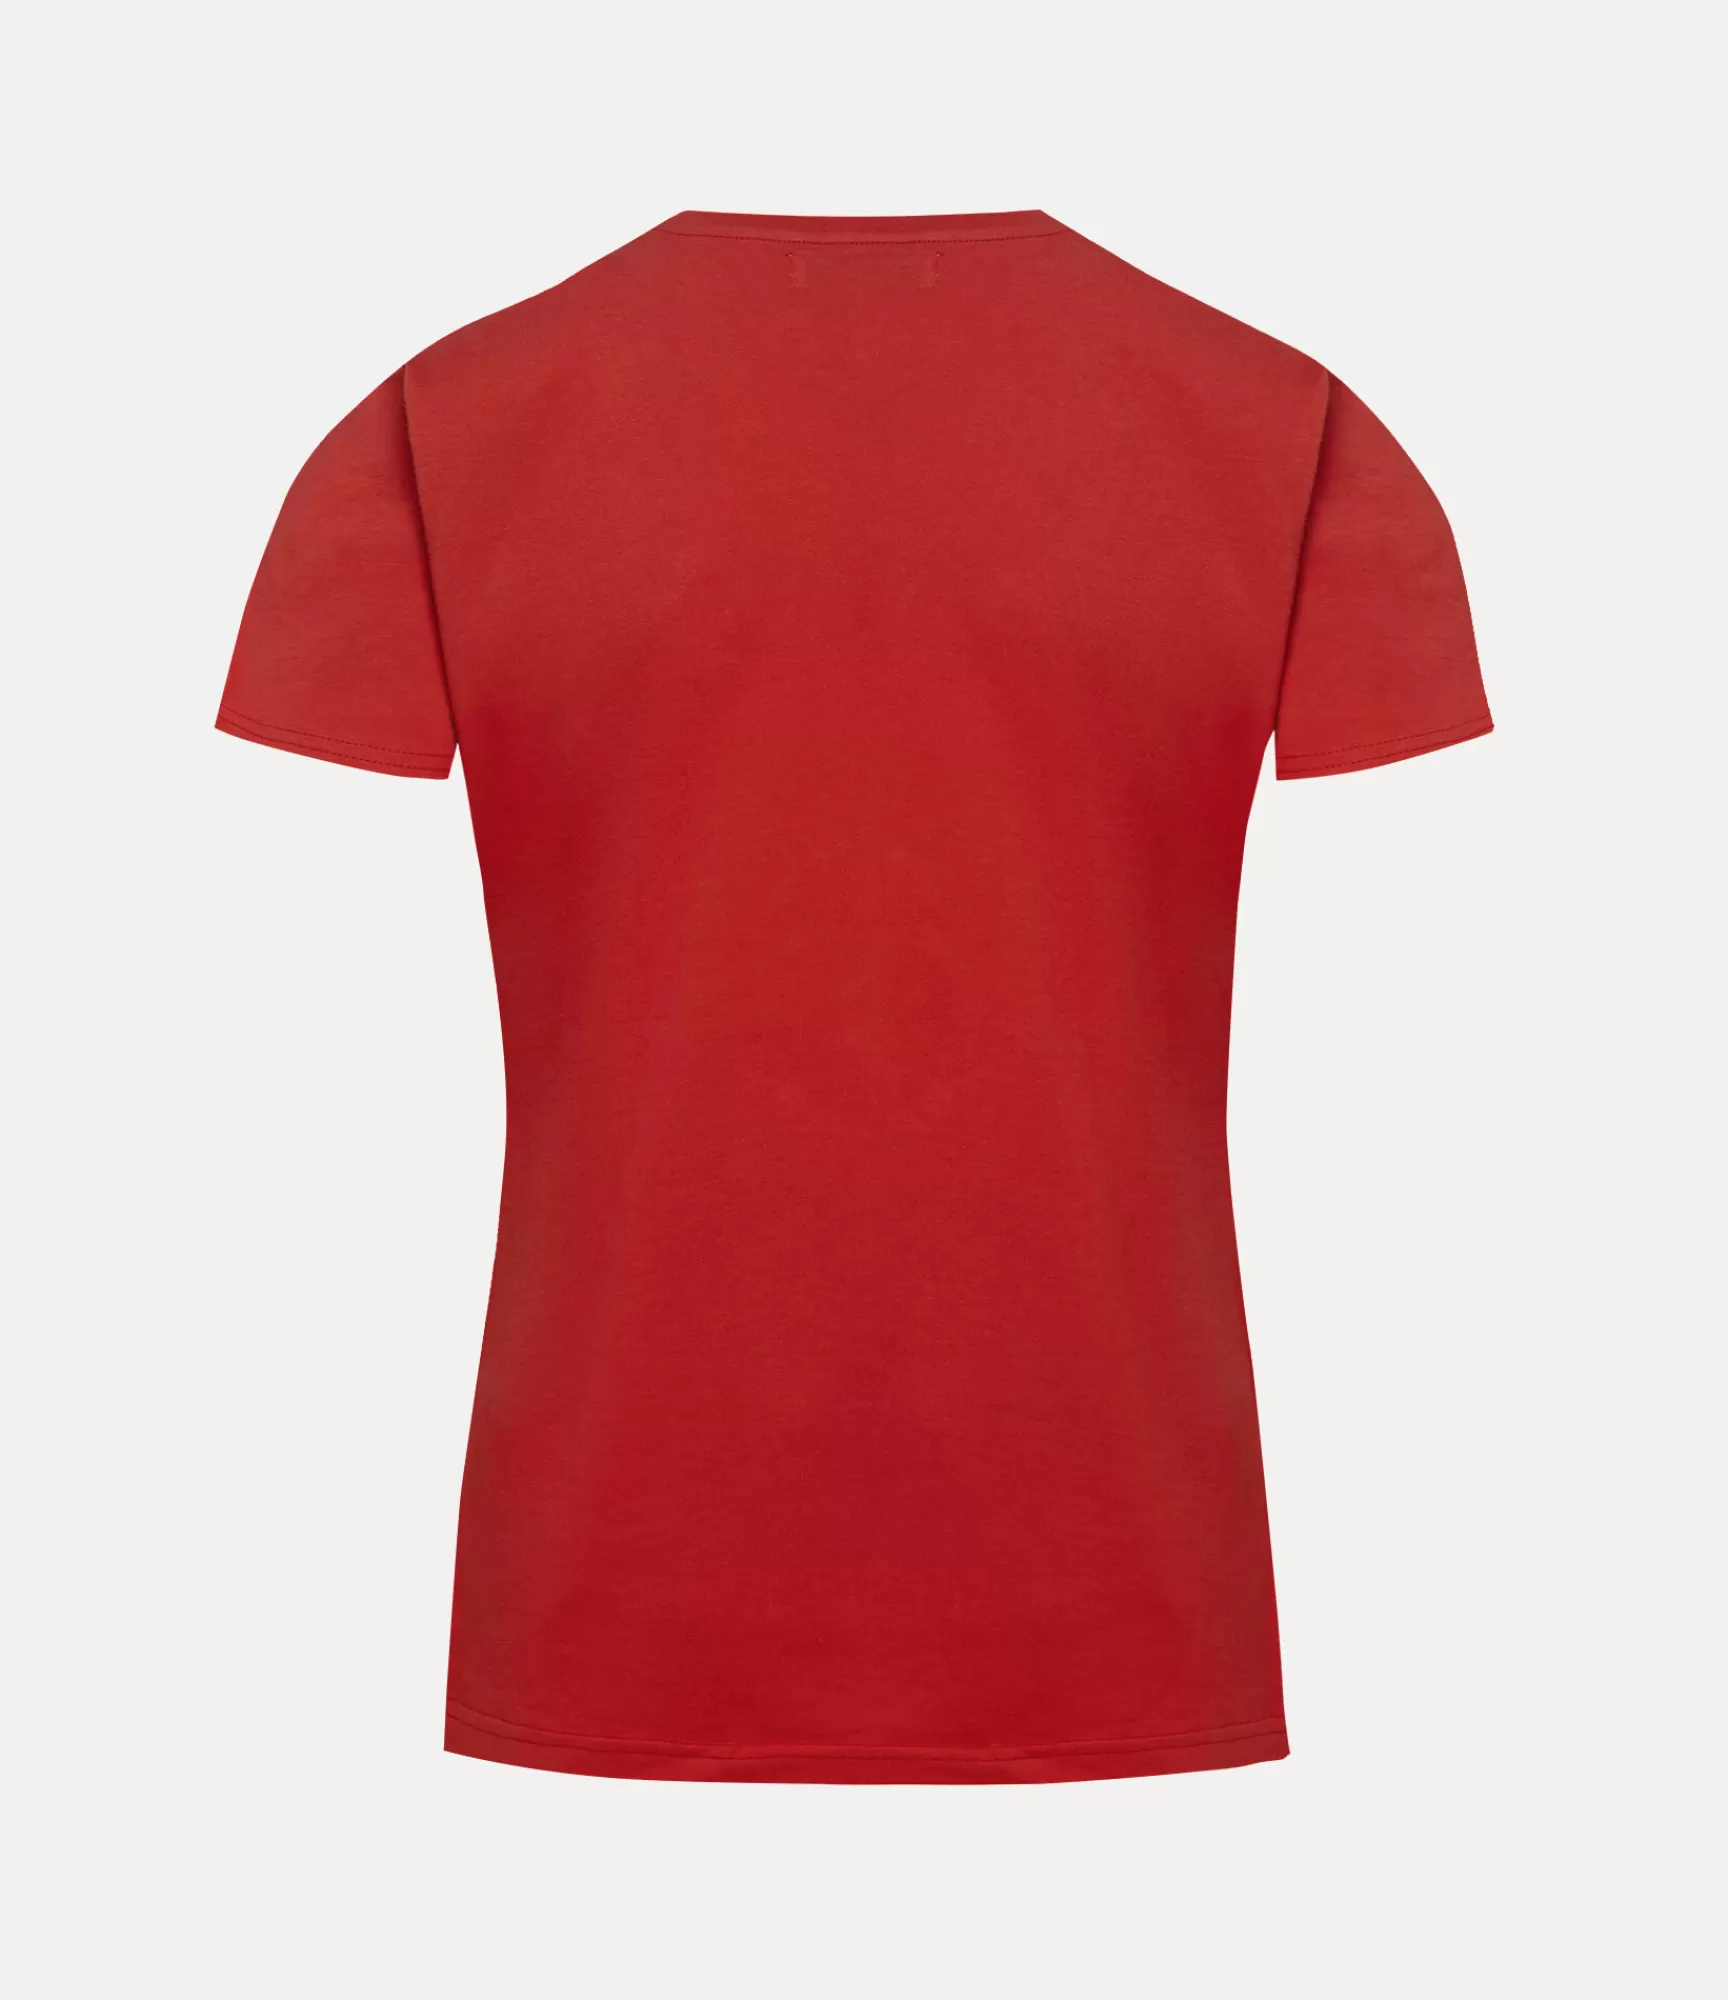 Vivienne Westwood T-Shirts and Polos*Orb peru' t-shirt Red